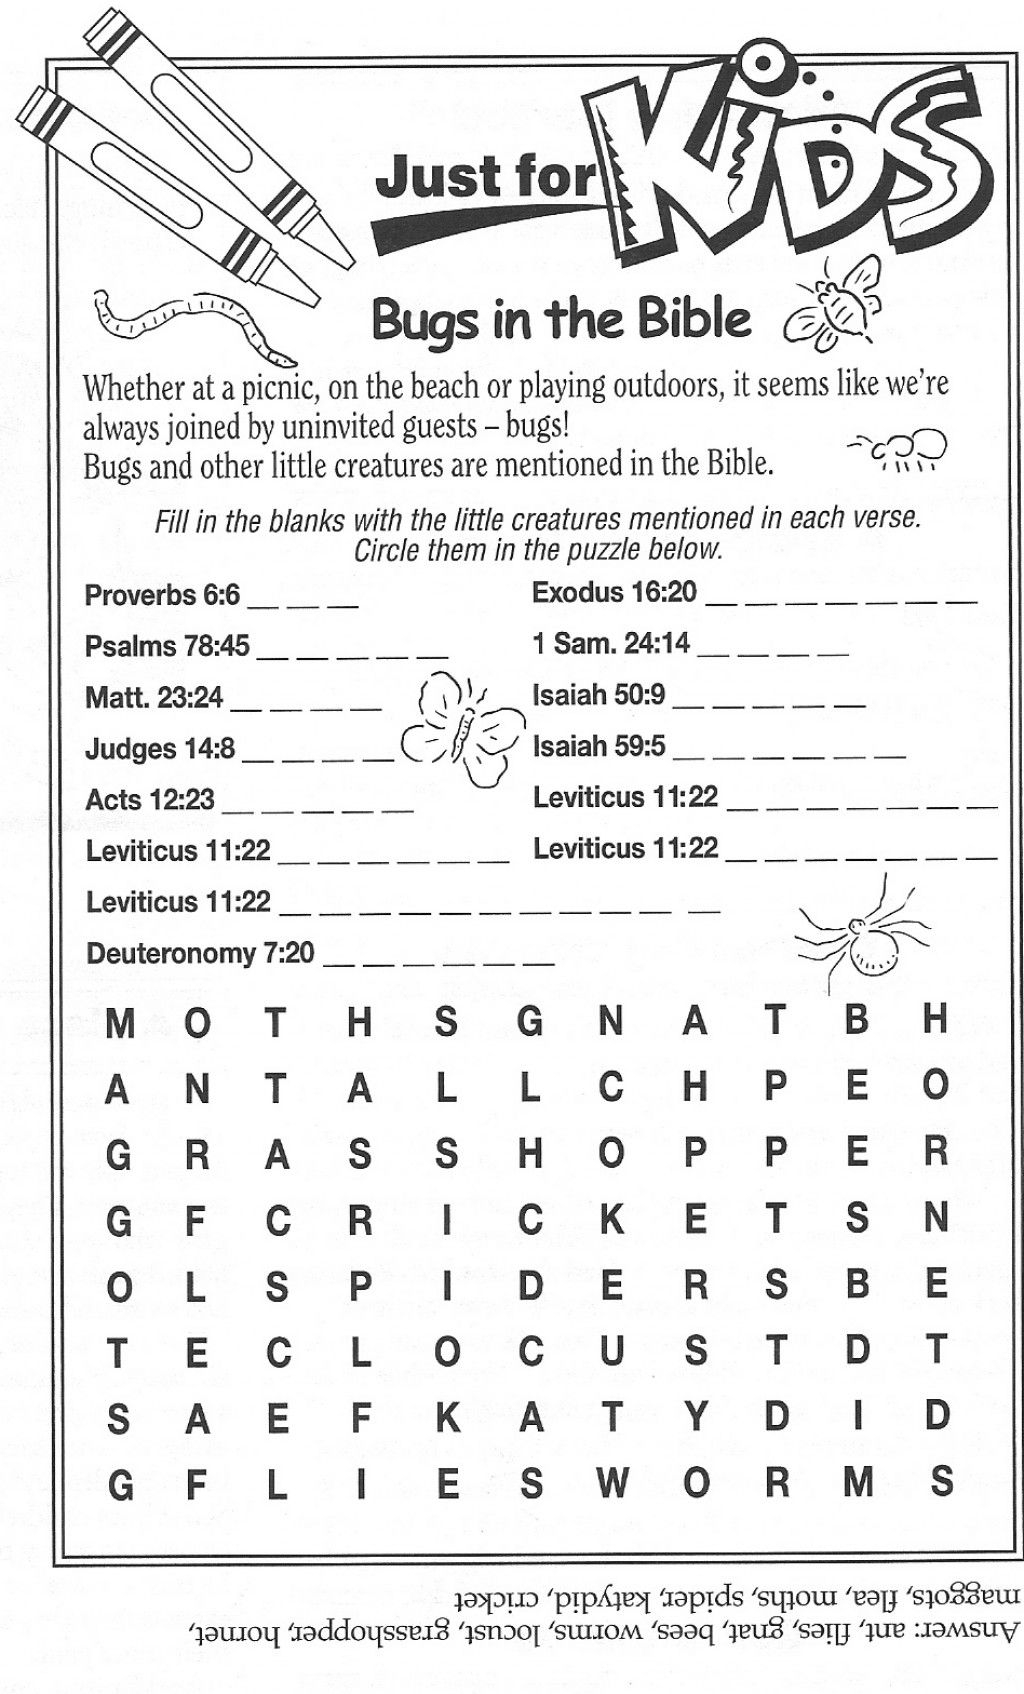 Online Bible Word Search Printable Pages - Zondagschool